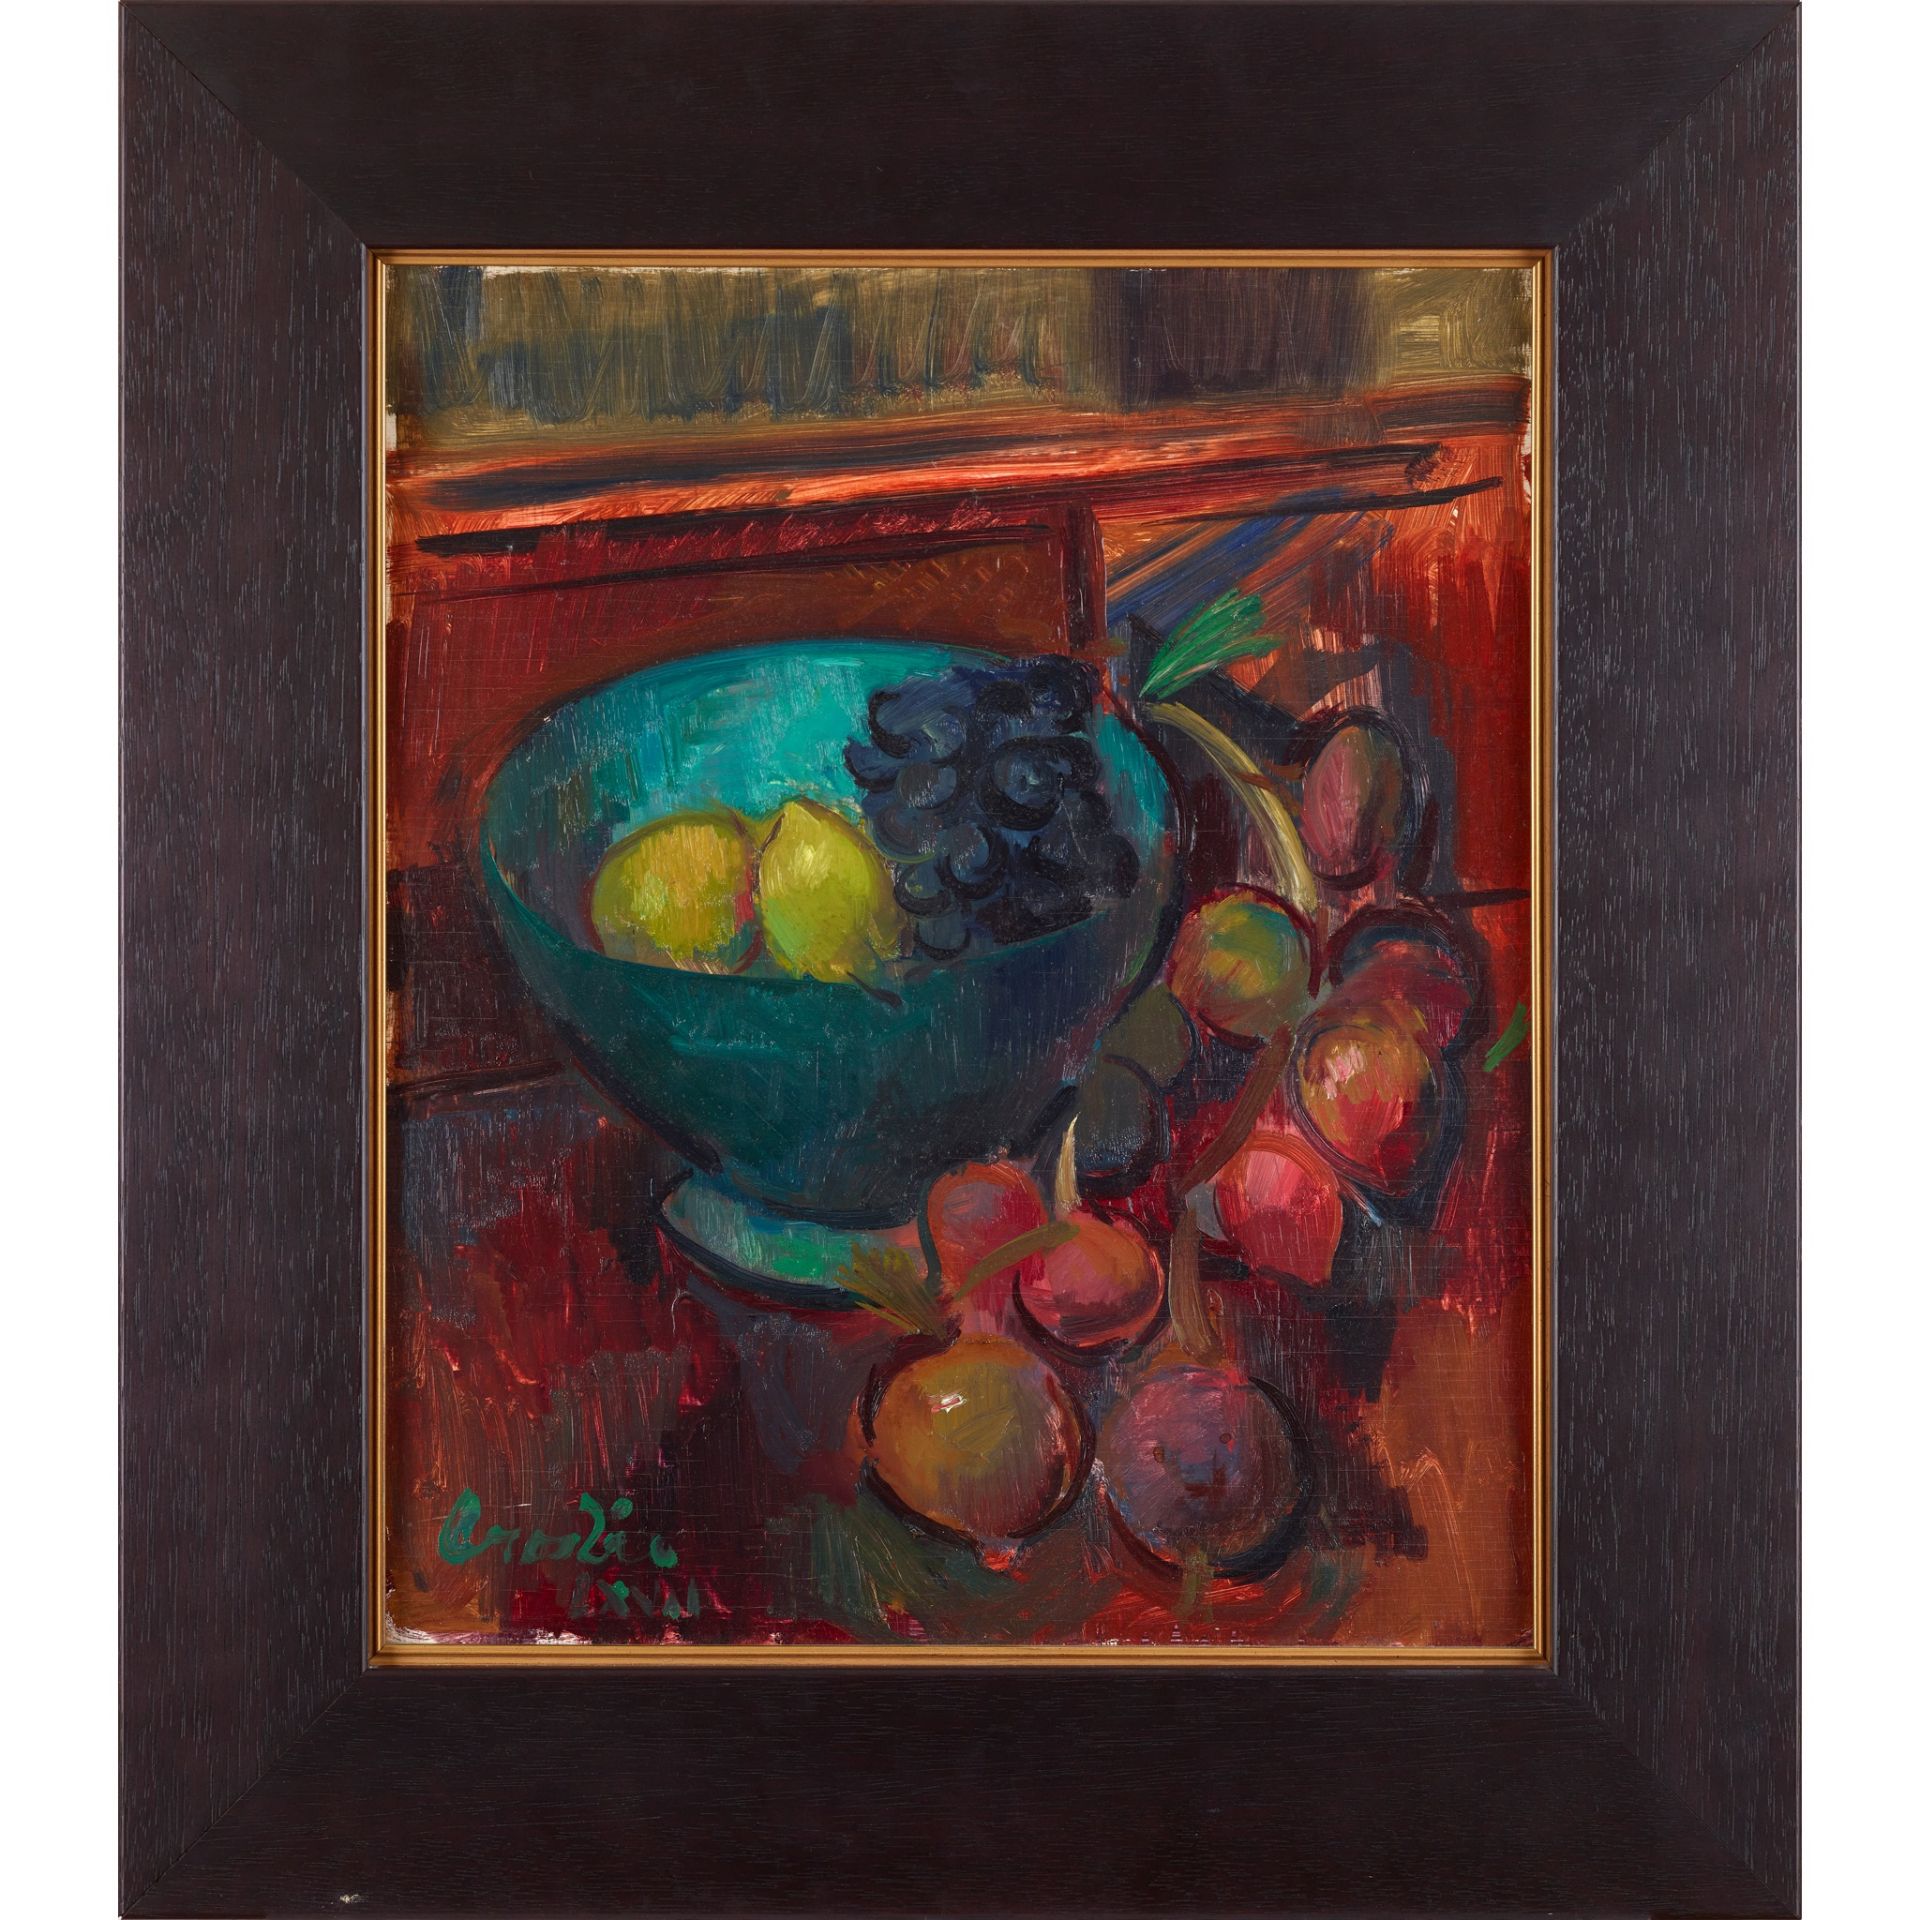 § WILLIAM CROSBIE R.S.A. (SCOTTISH 1915-1999) STILL LIFE WITH BOWL OF LEMONS - Image 2 of 3